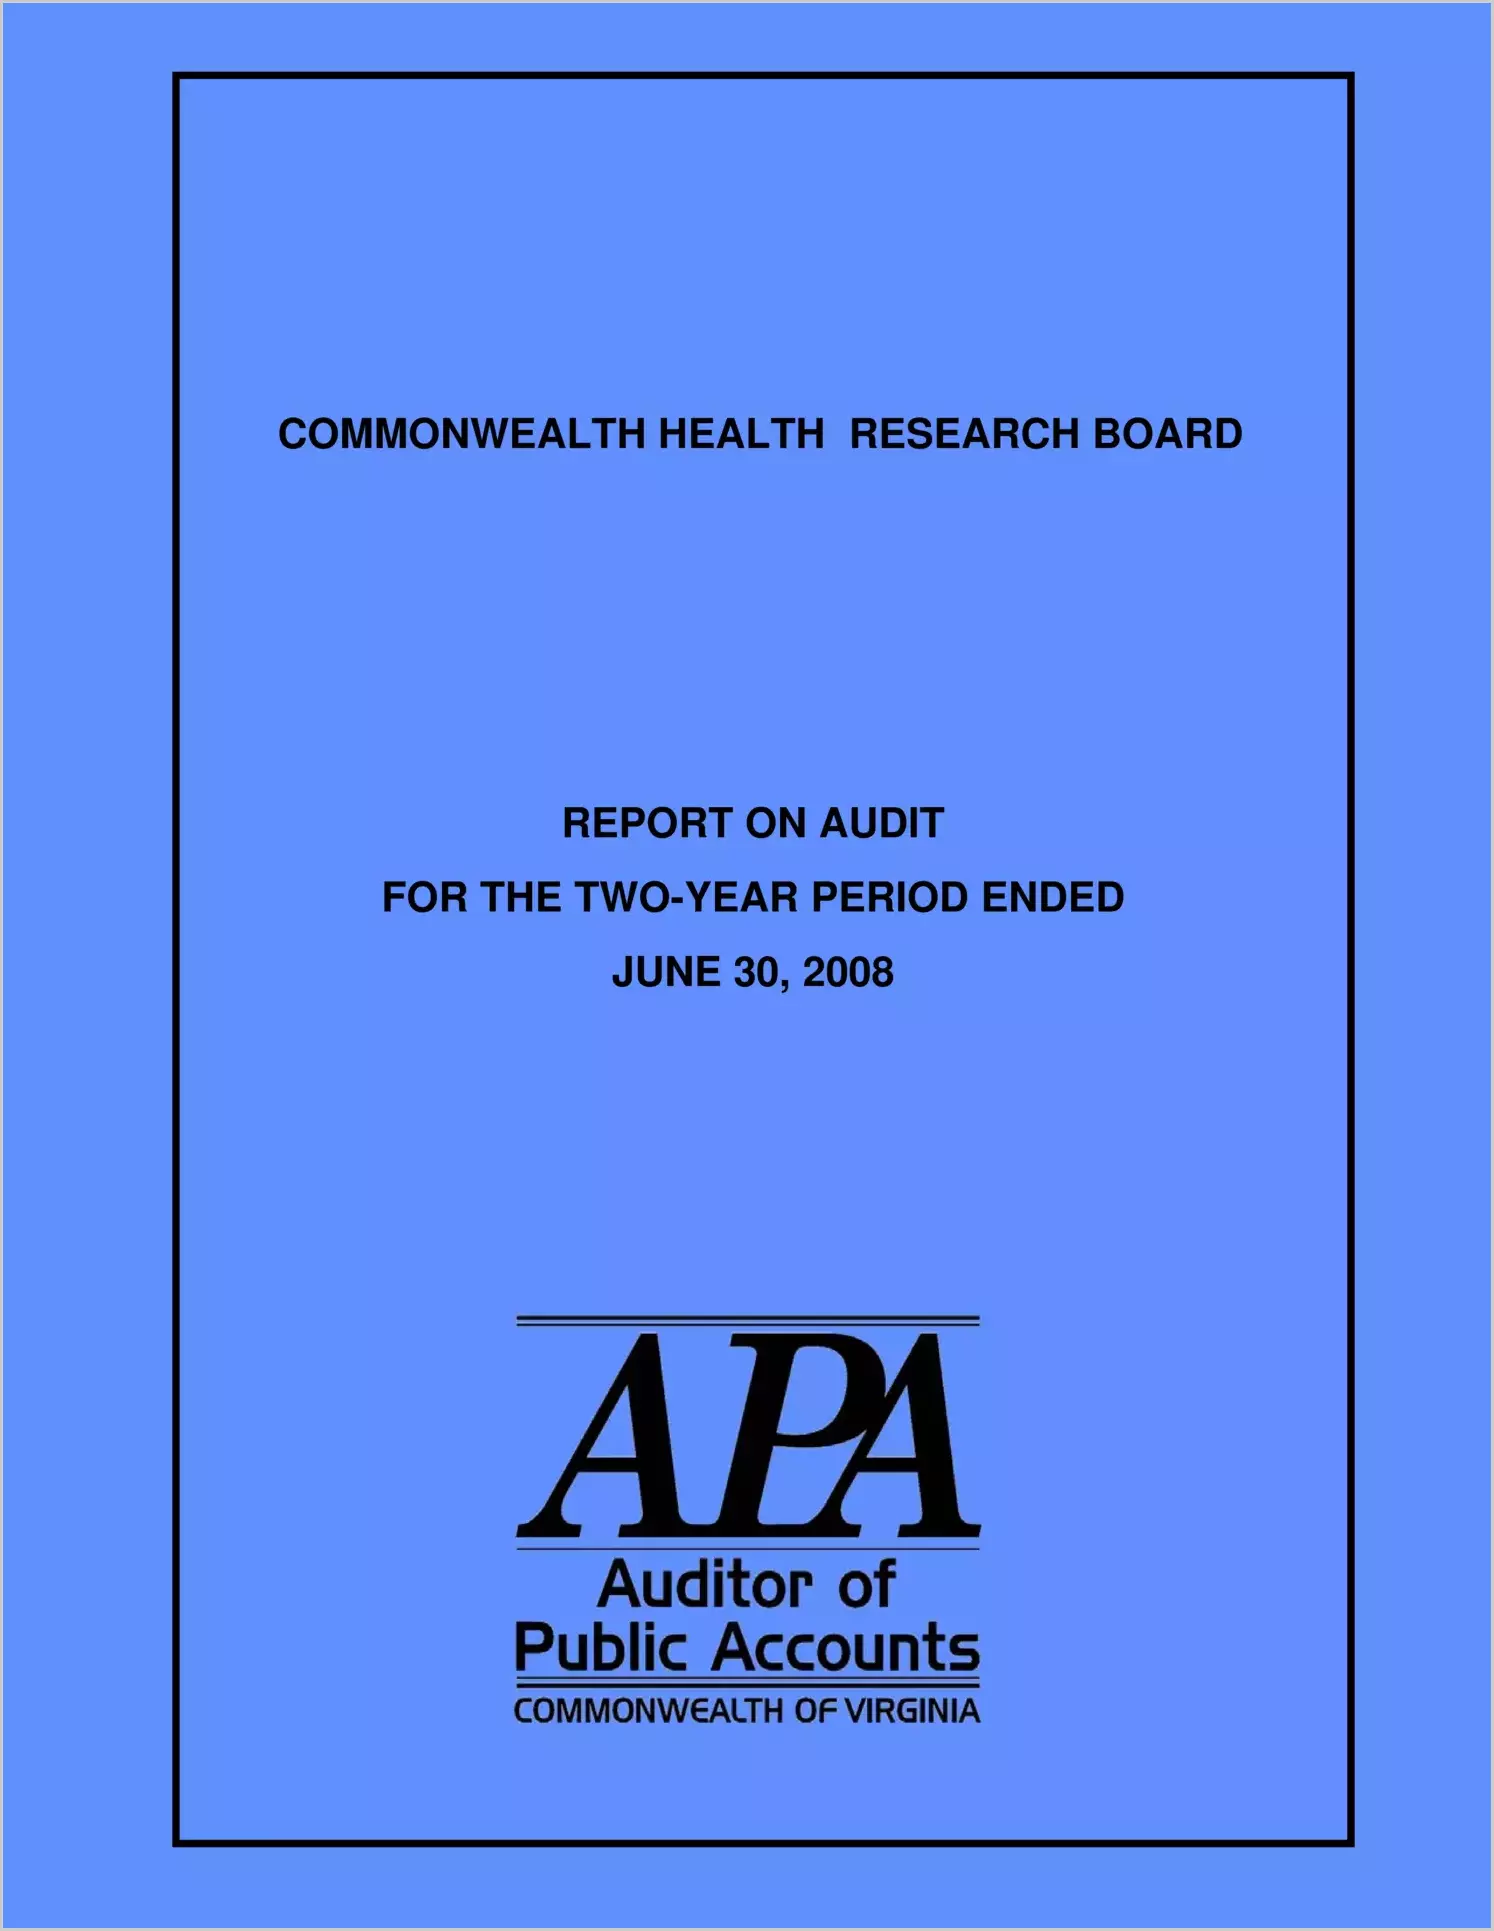 Commonwealth Health Research Board for the two-year period ended June 30, 2008